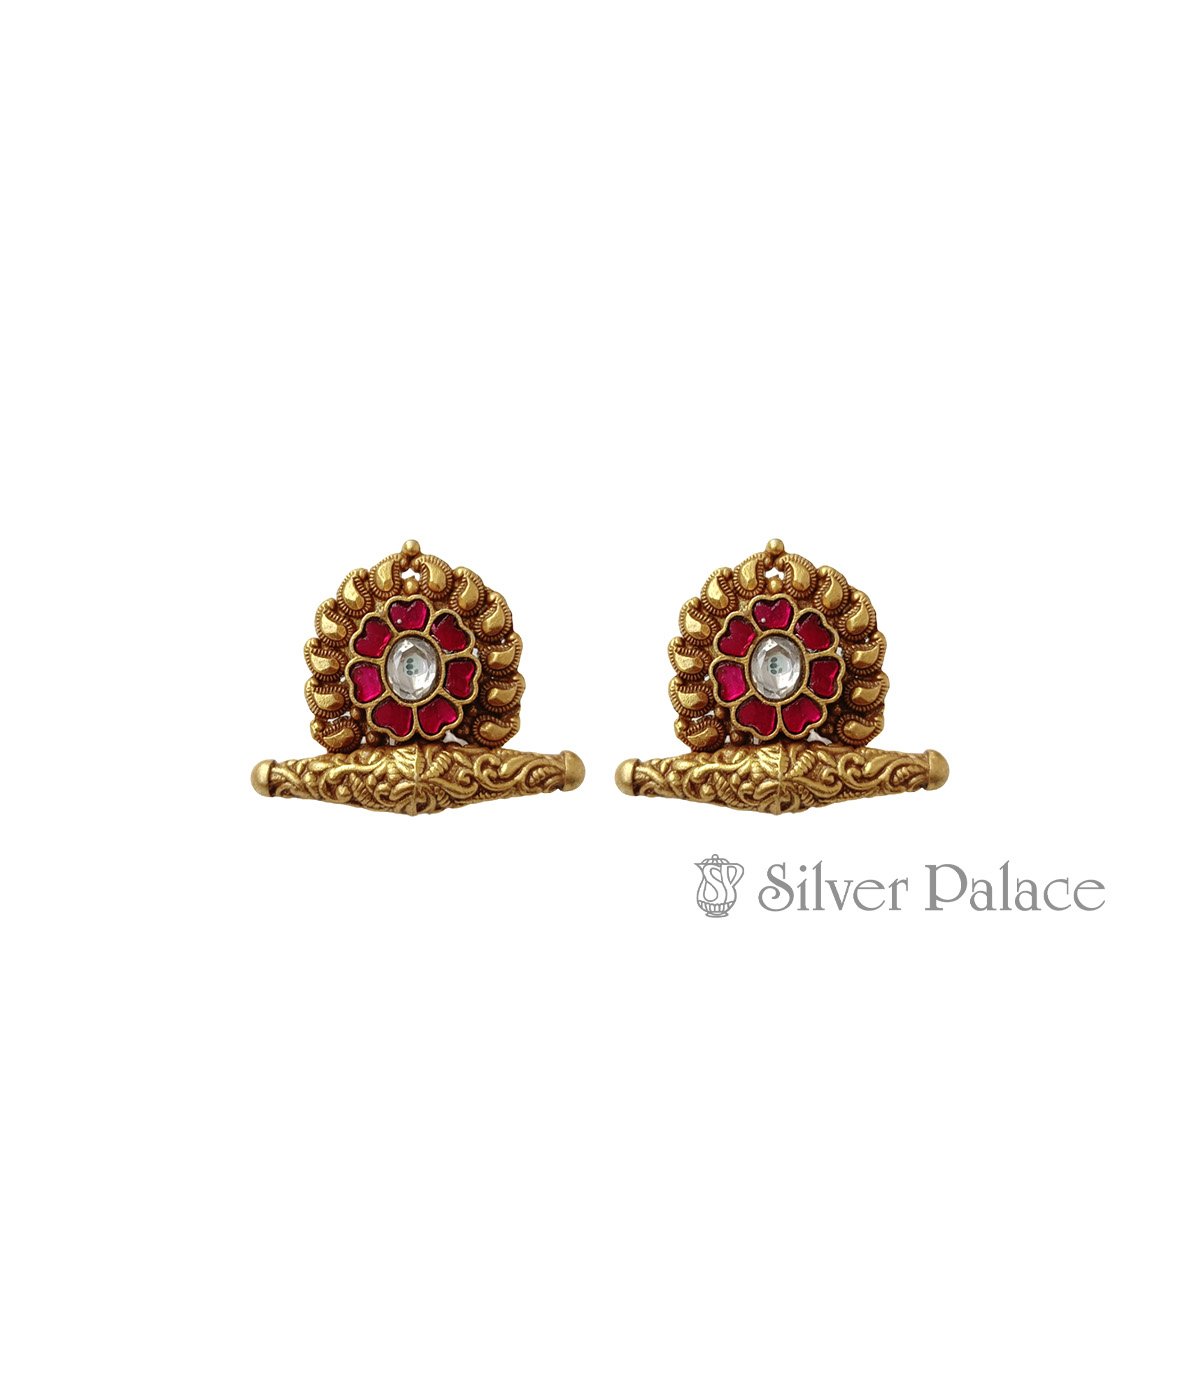 92.5 GOLD POLISHED RED STONE FLORAL DESIGN EARRINGS